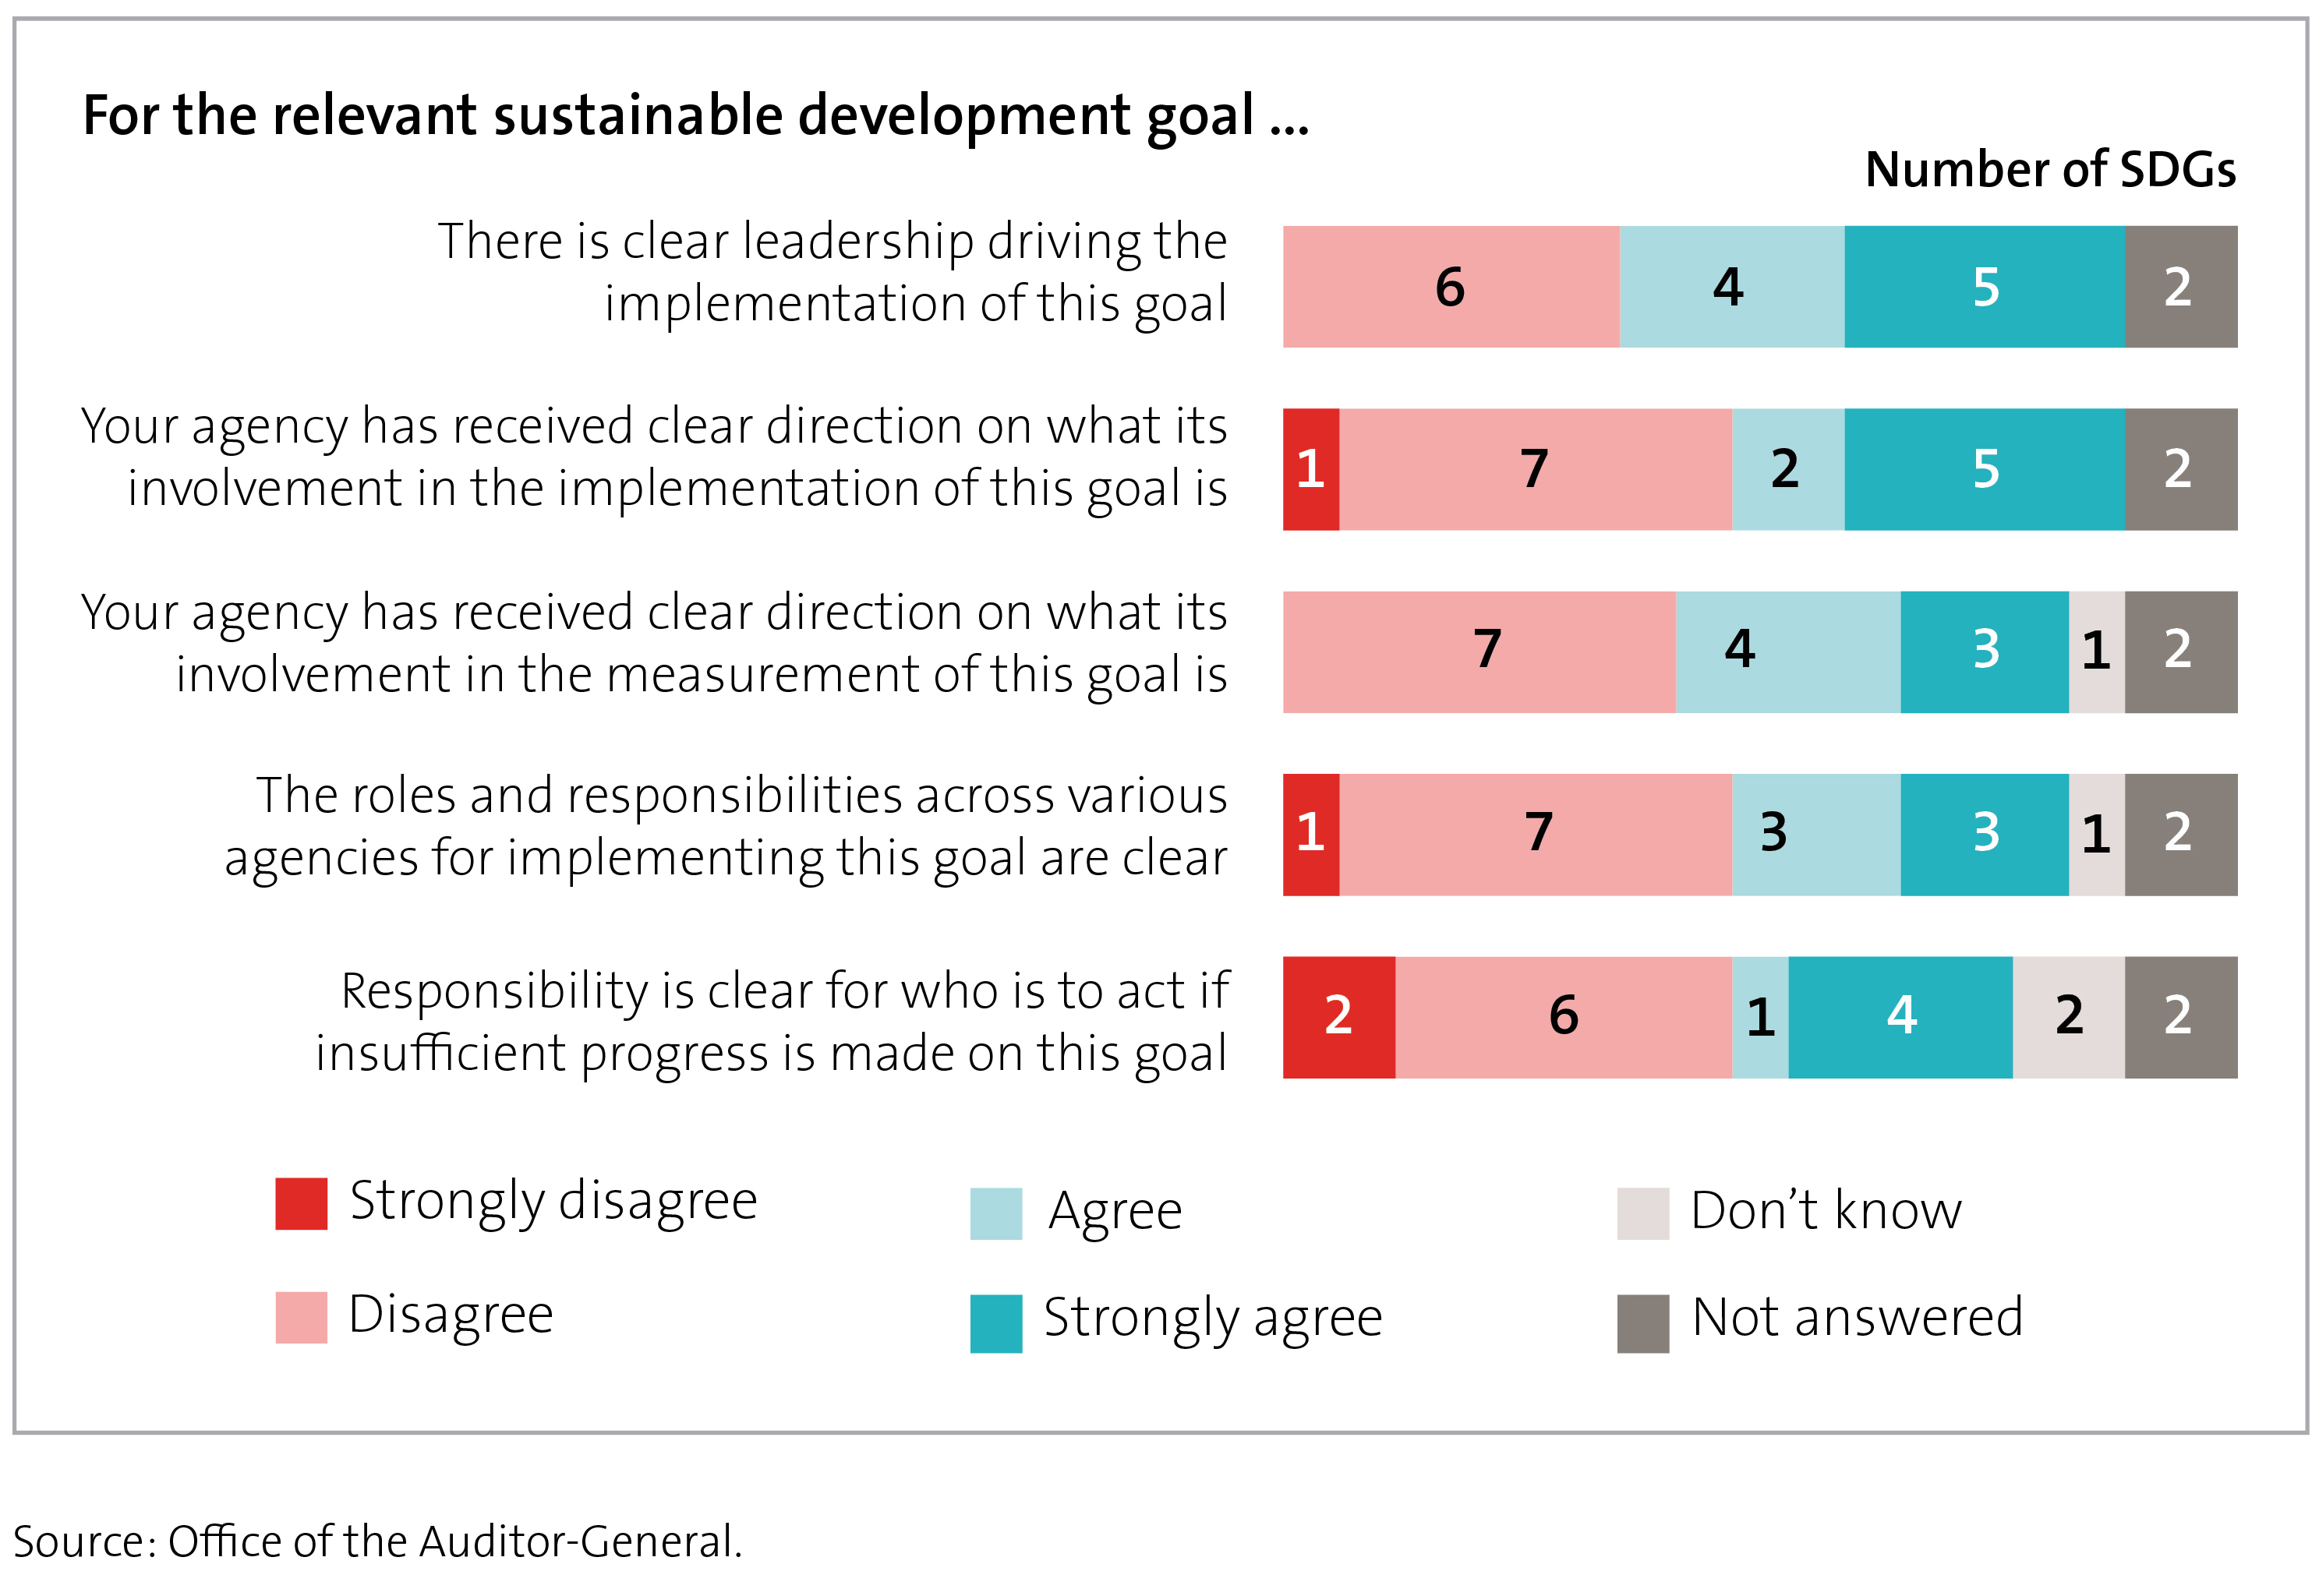 Figure 6 - Extent to which agencies agreed or disagreed with leadership and accountability statements for the 17 sustainable development goals